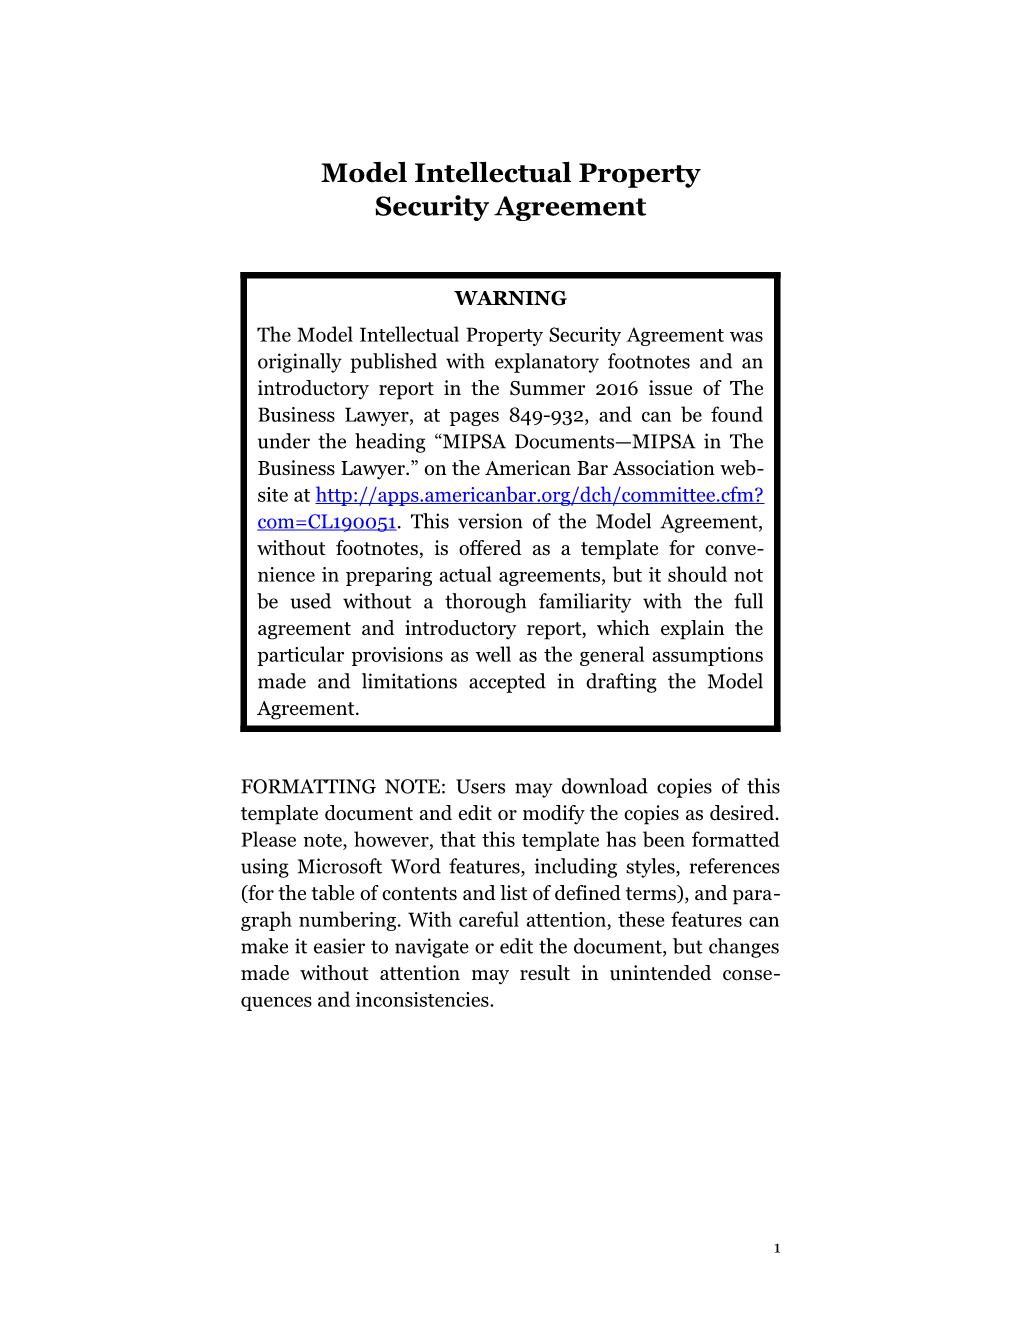 Model Intellectual Property Security Agreement